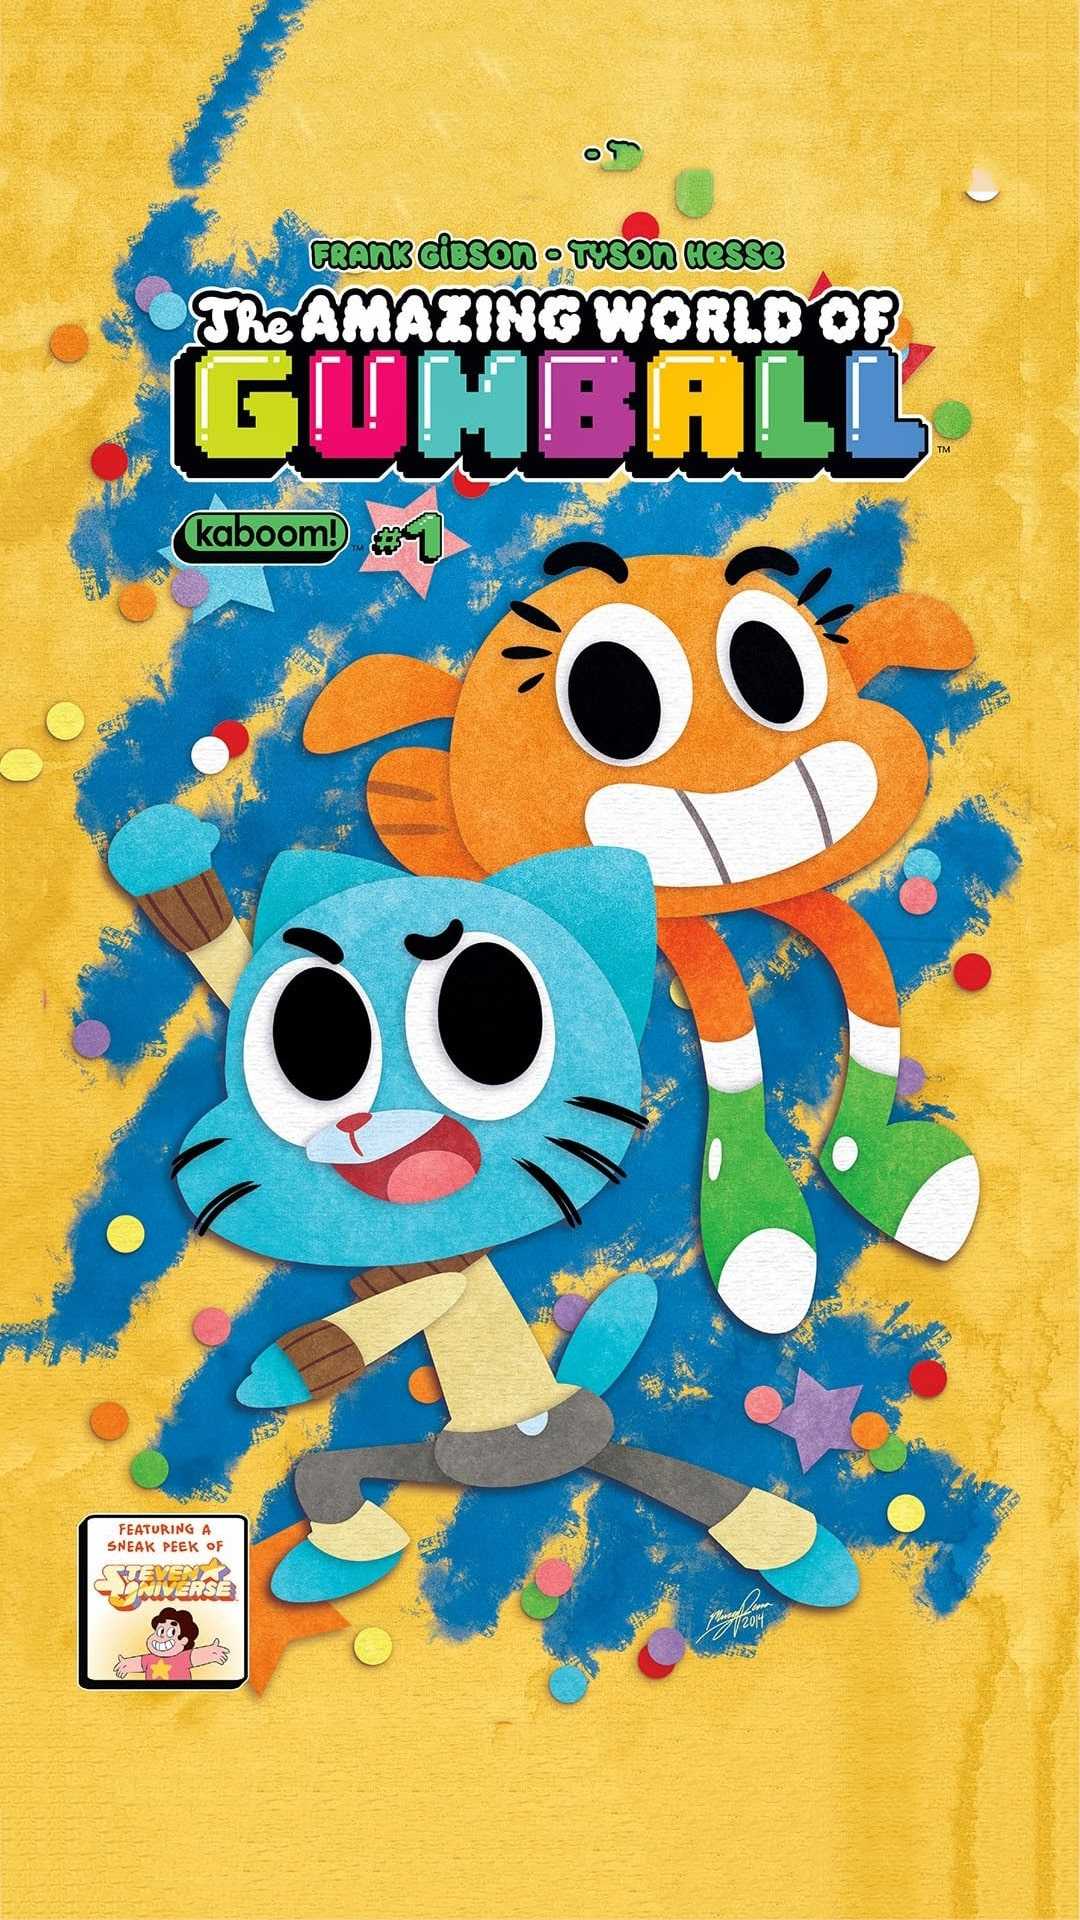 Gumball iPhone Wallpapers  Wallpaper Cave